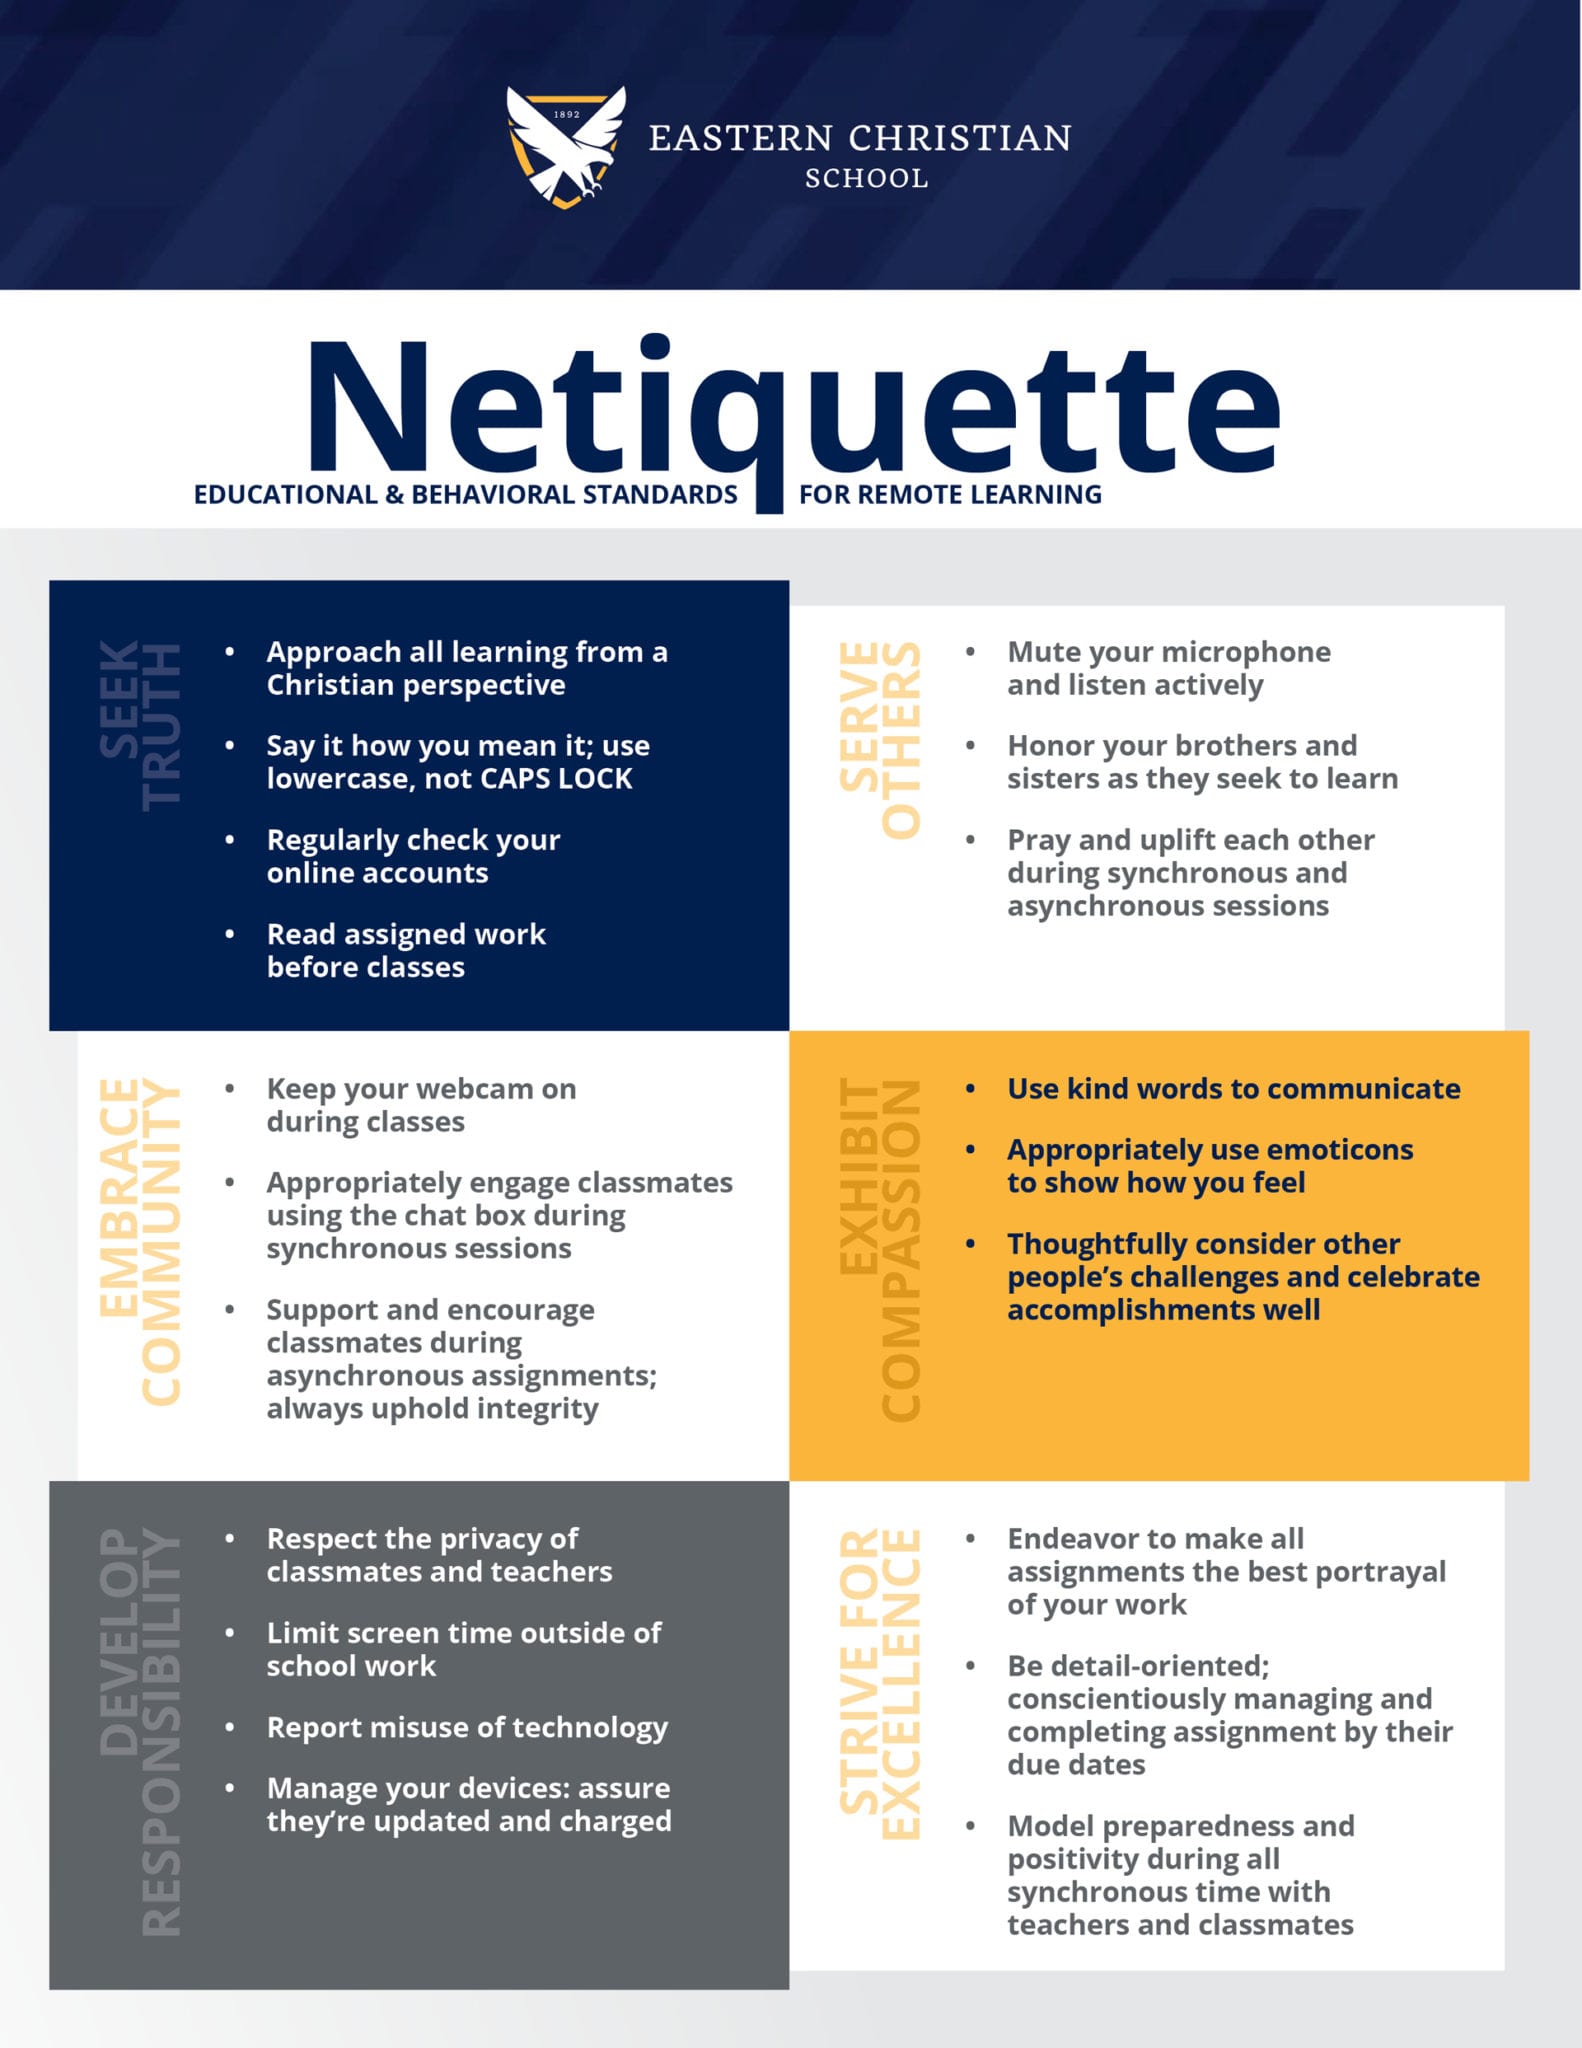 Cobra Netiquette Tips to Help Online Learning - News and Announcements 